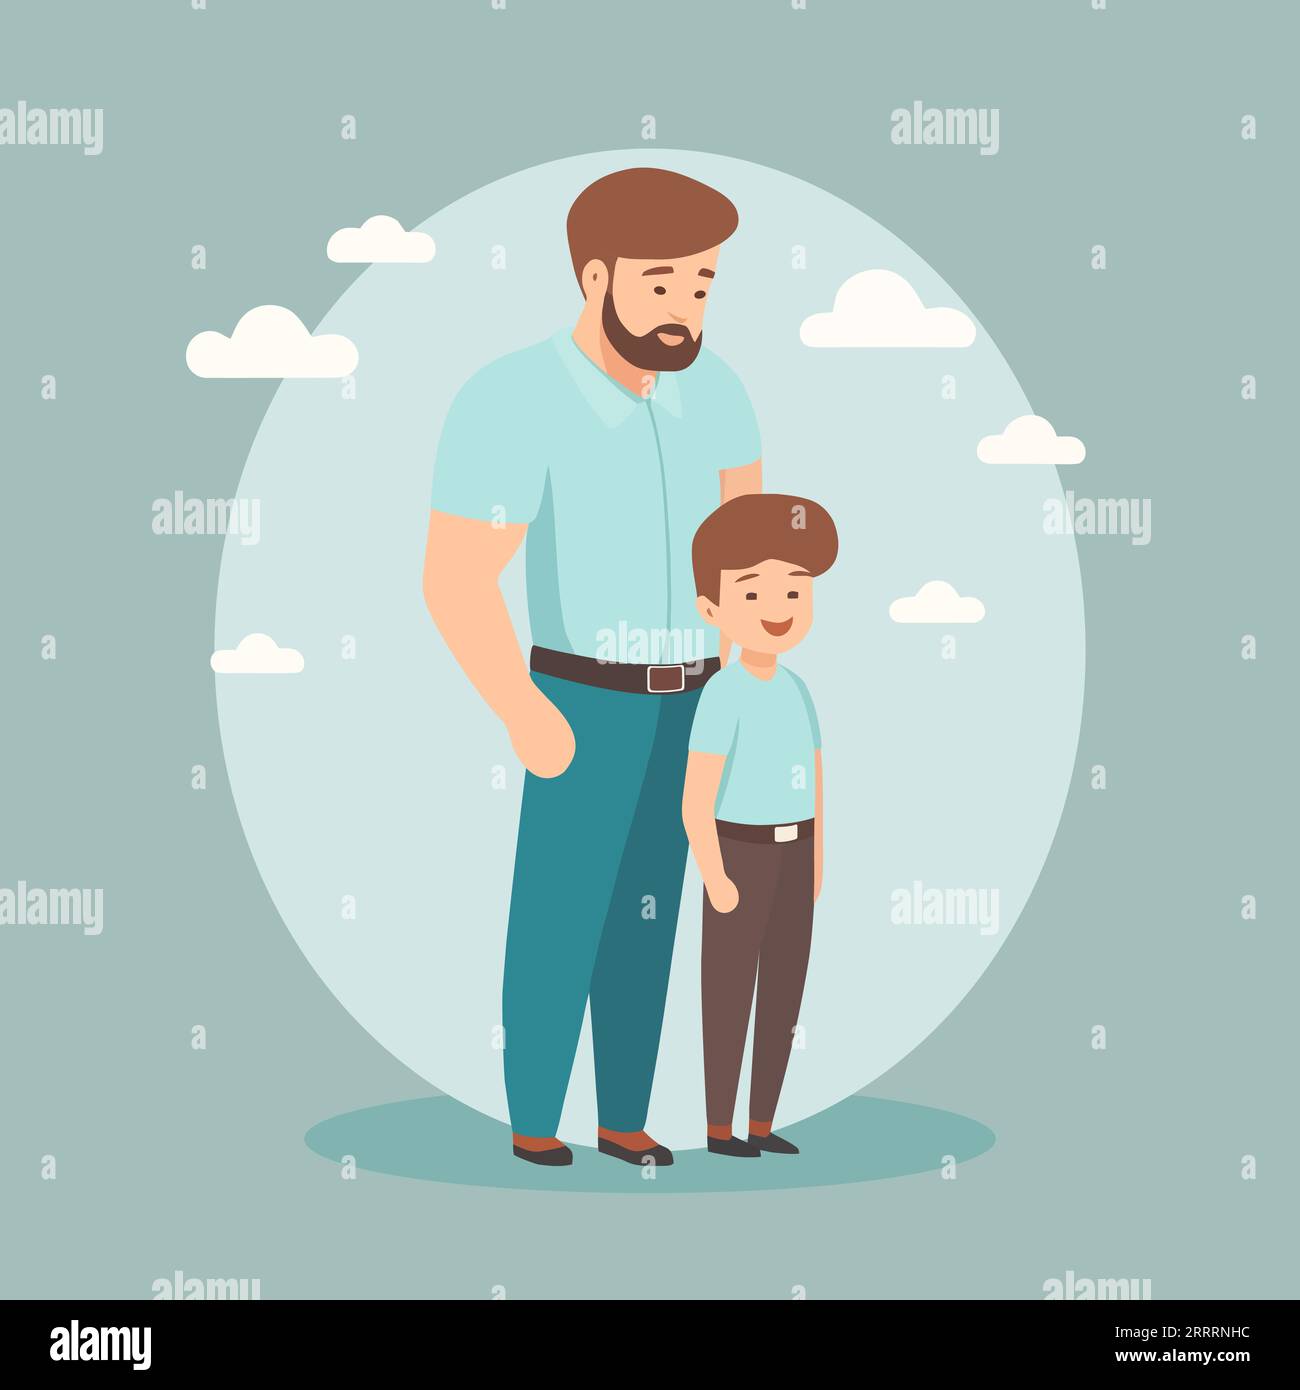 Father's day flat design, Dad standing behind son illustration isolated from background Stock Vector